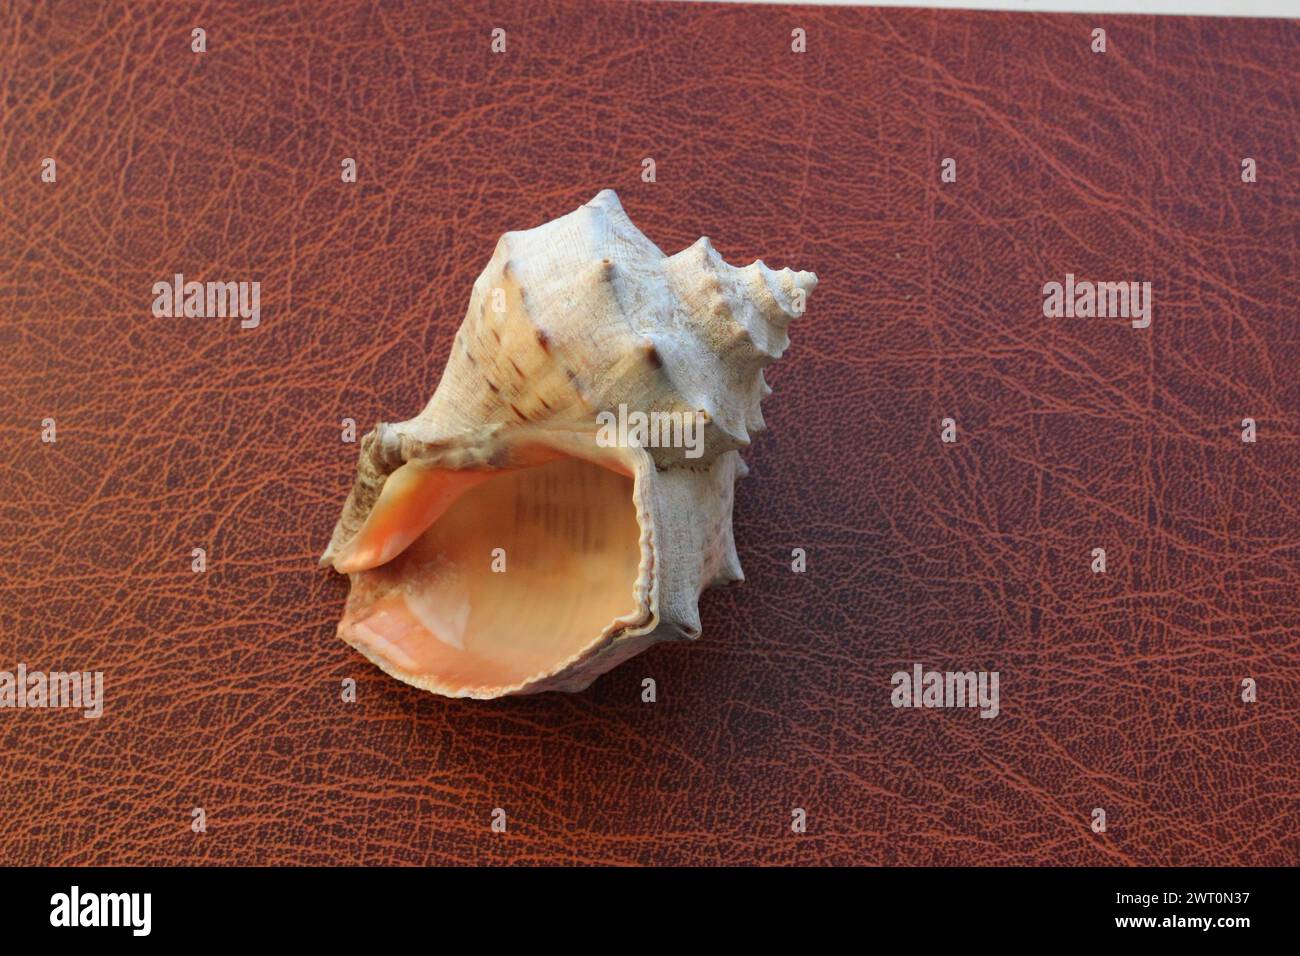 Sound of waves image.  Inner side of a sea shell lying on leather surface Stock Photo